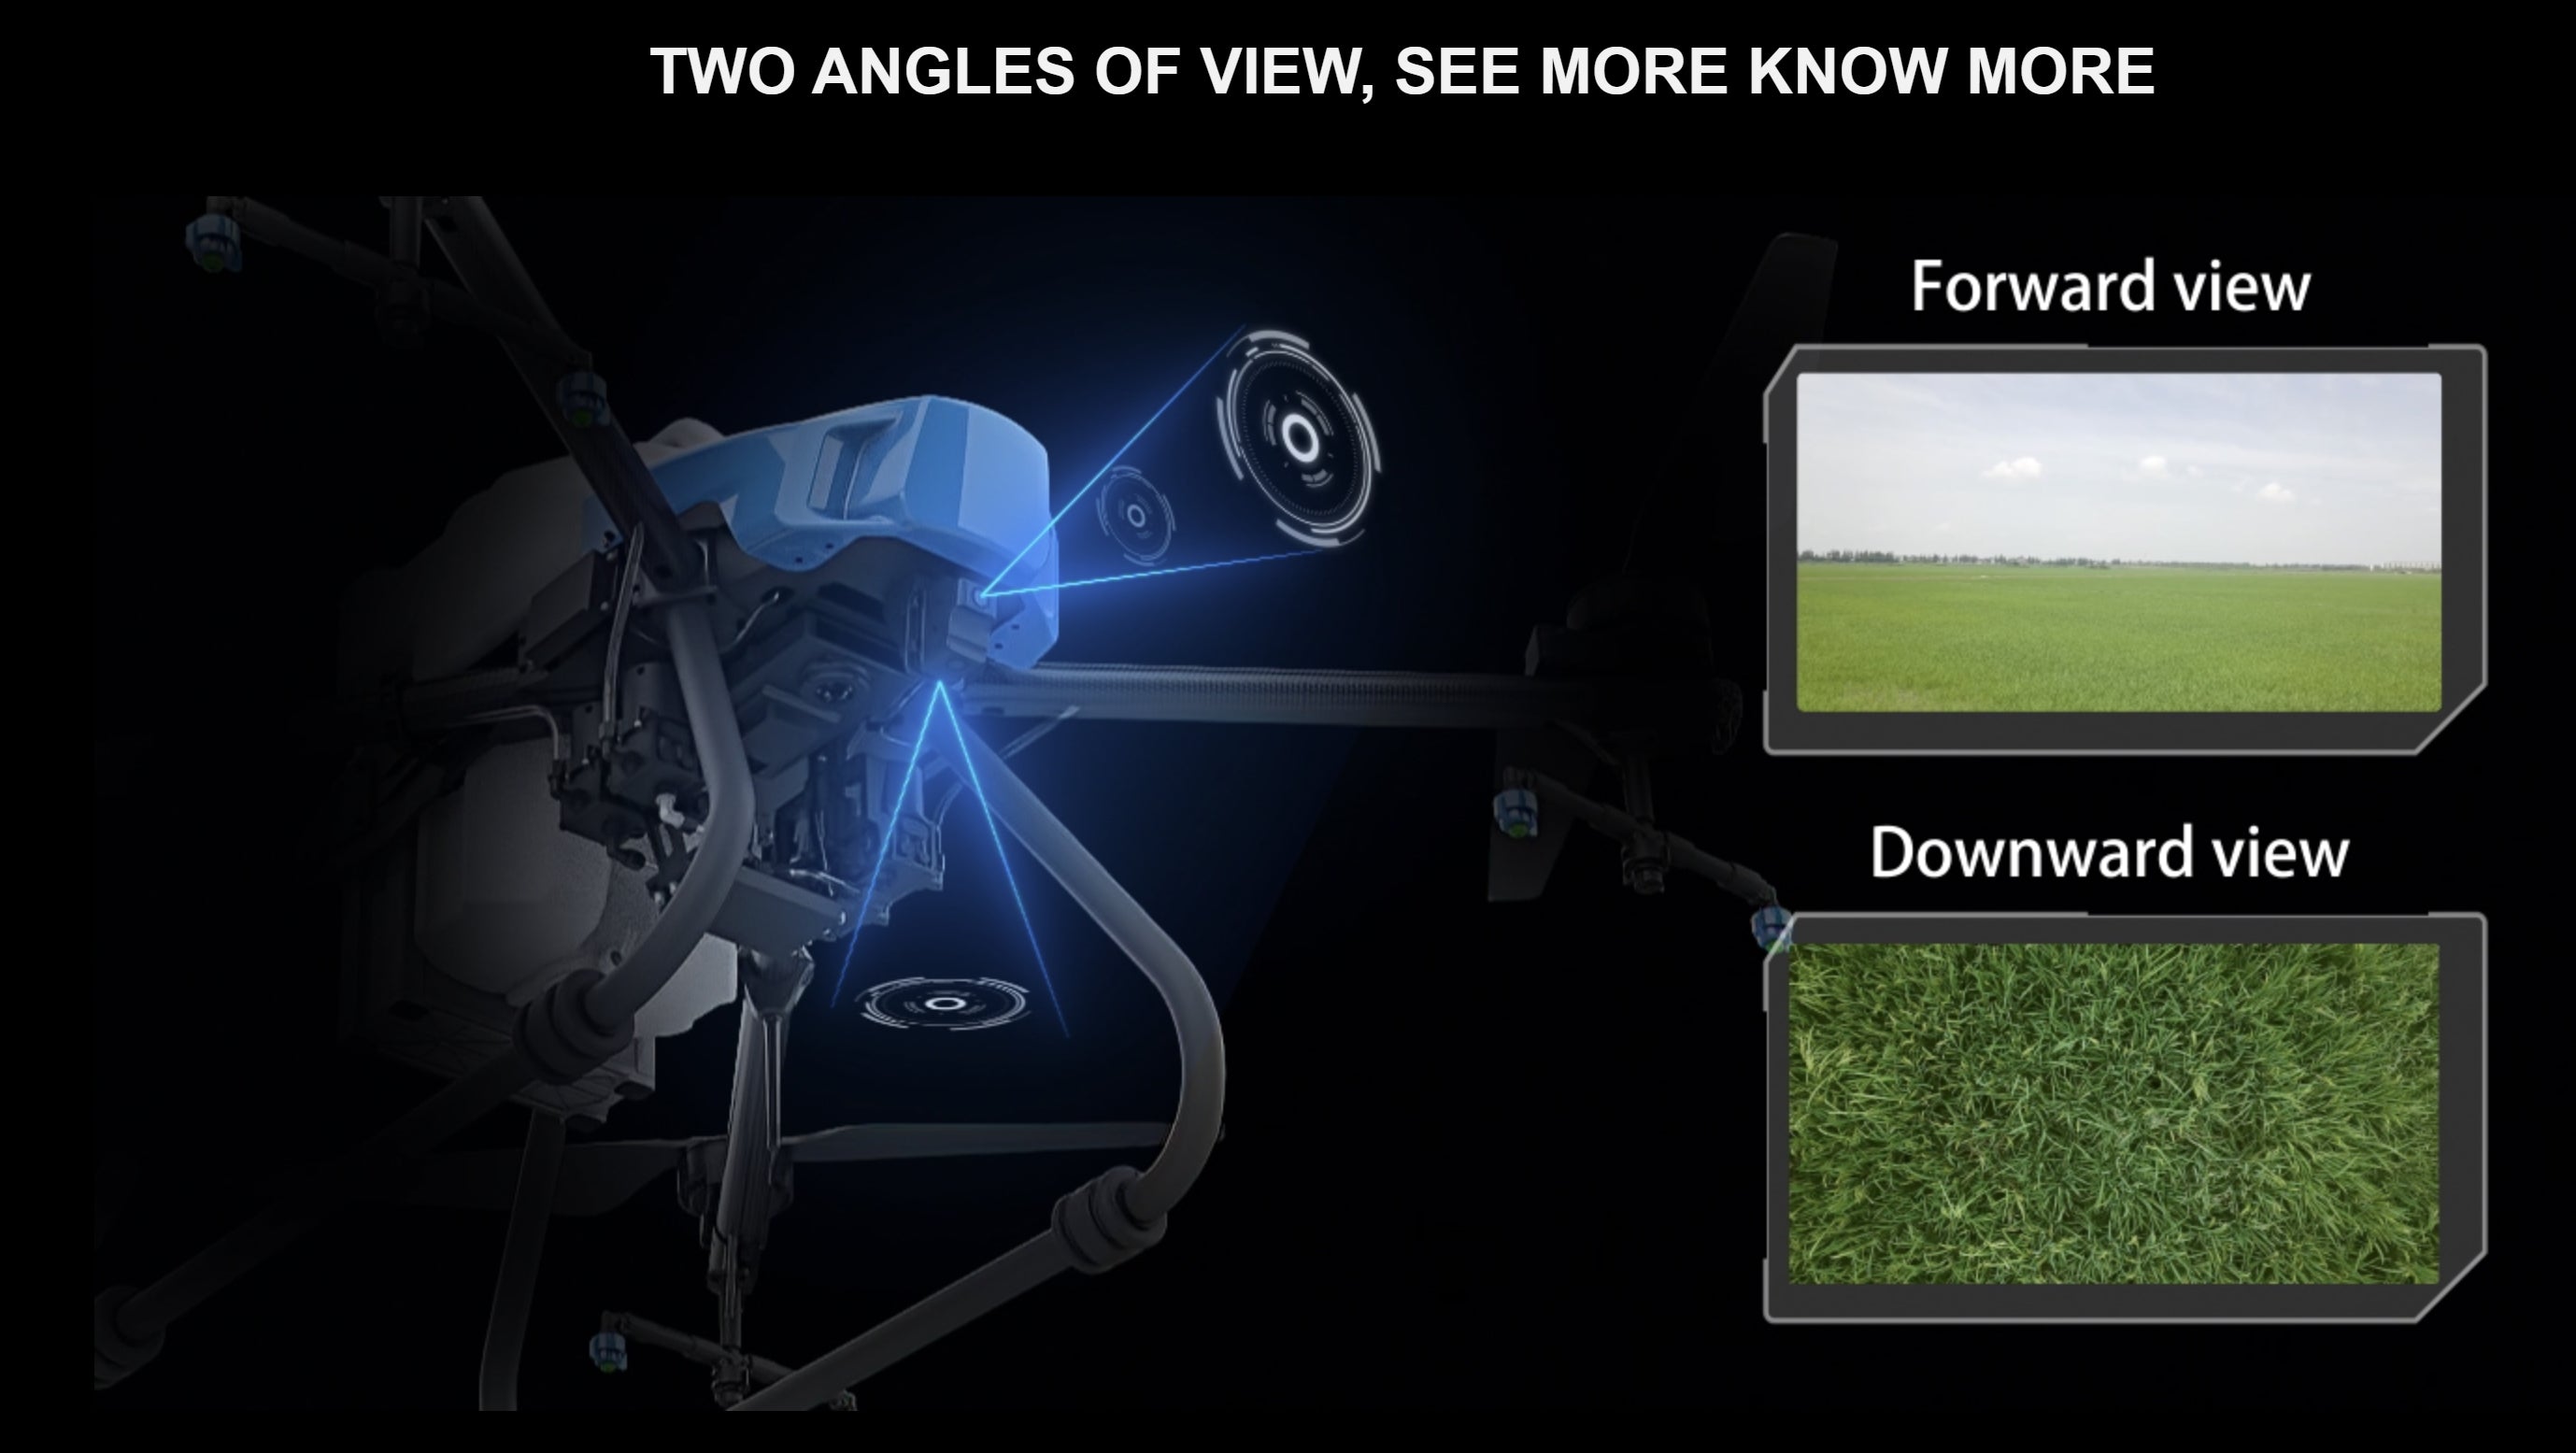 AGR A22P Agriculture Drone, Capture multiple perspectives with the AGR A22P drone, featuring forward and downward views.